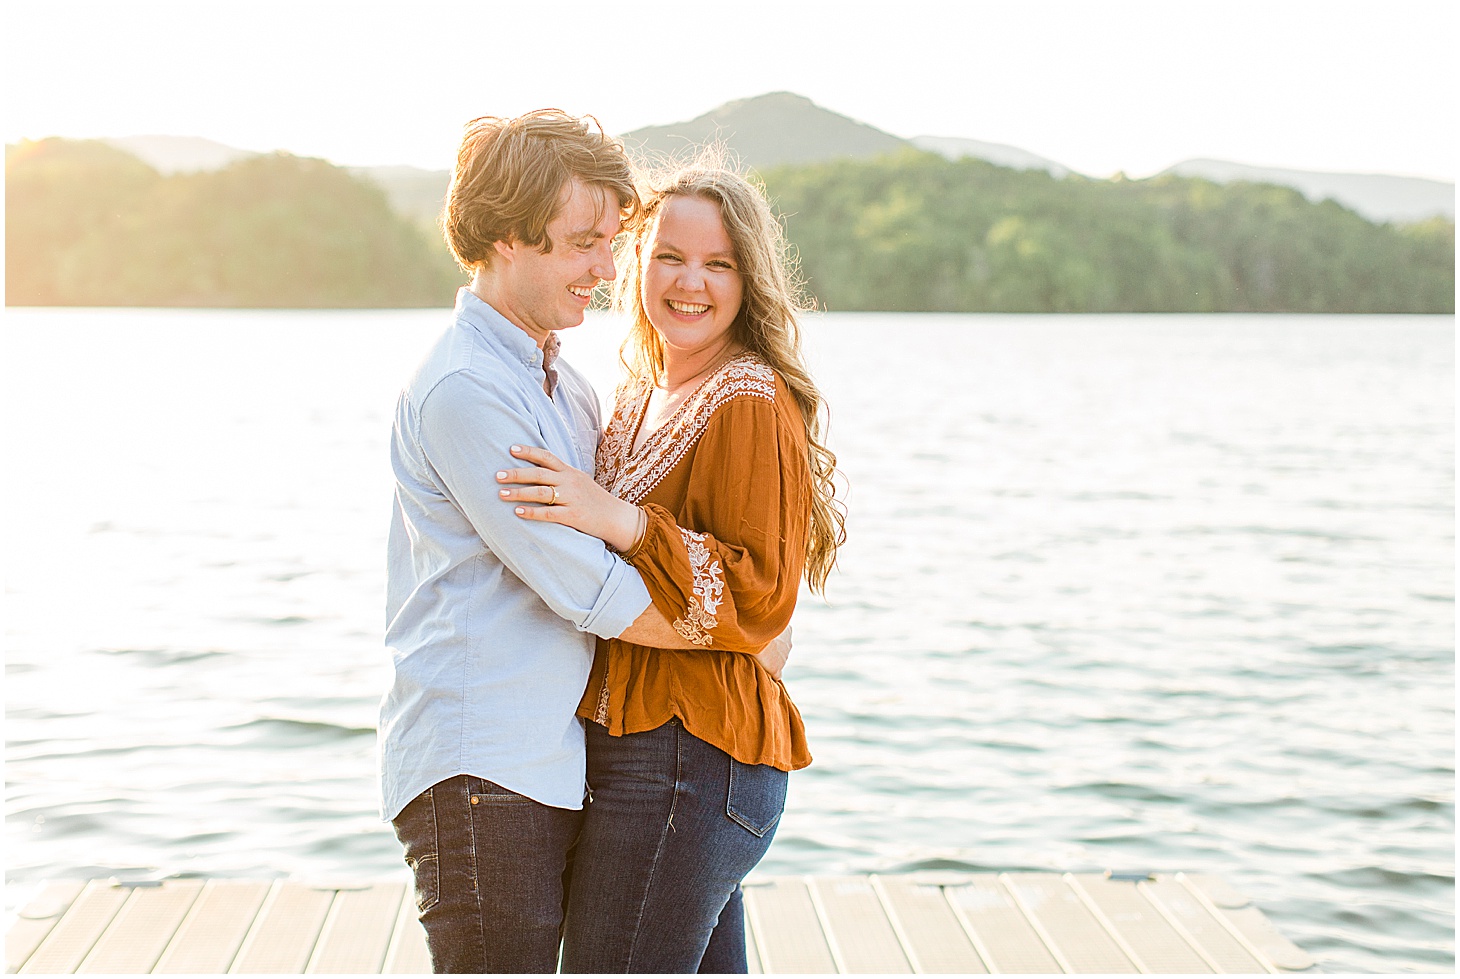 carvinscoveengagementsession_roanokeengagementsession_carvinscove_virginiawedding_virginiaweddingphotographer_vaweddingphotographer_photo_0036.jpg